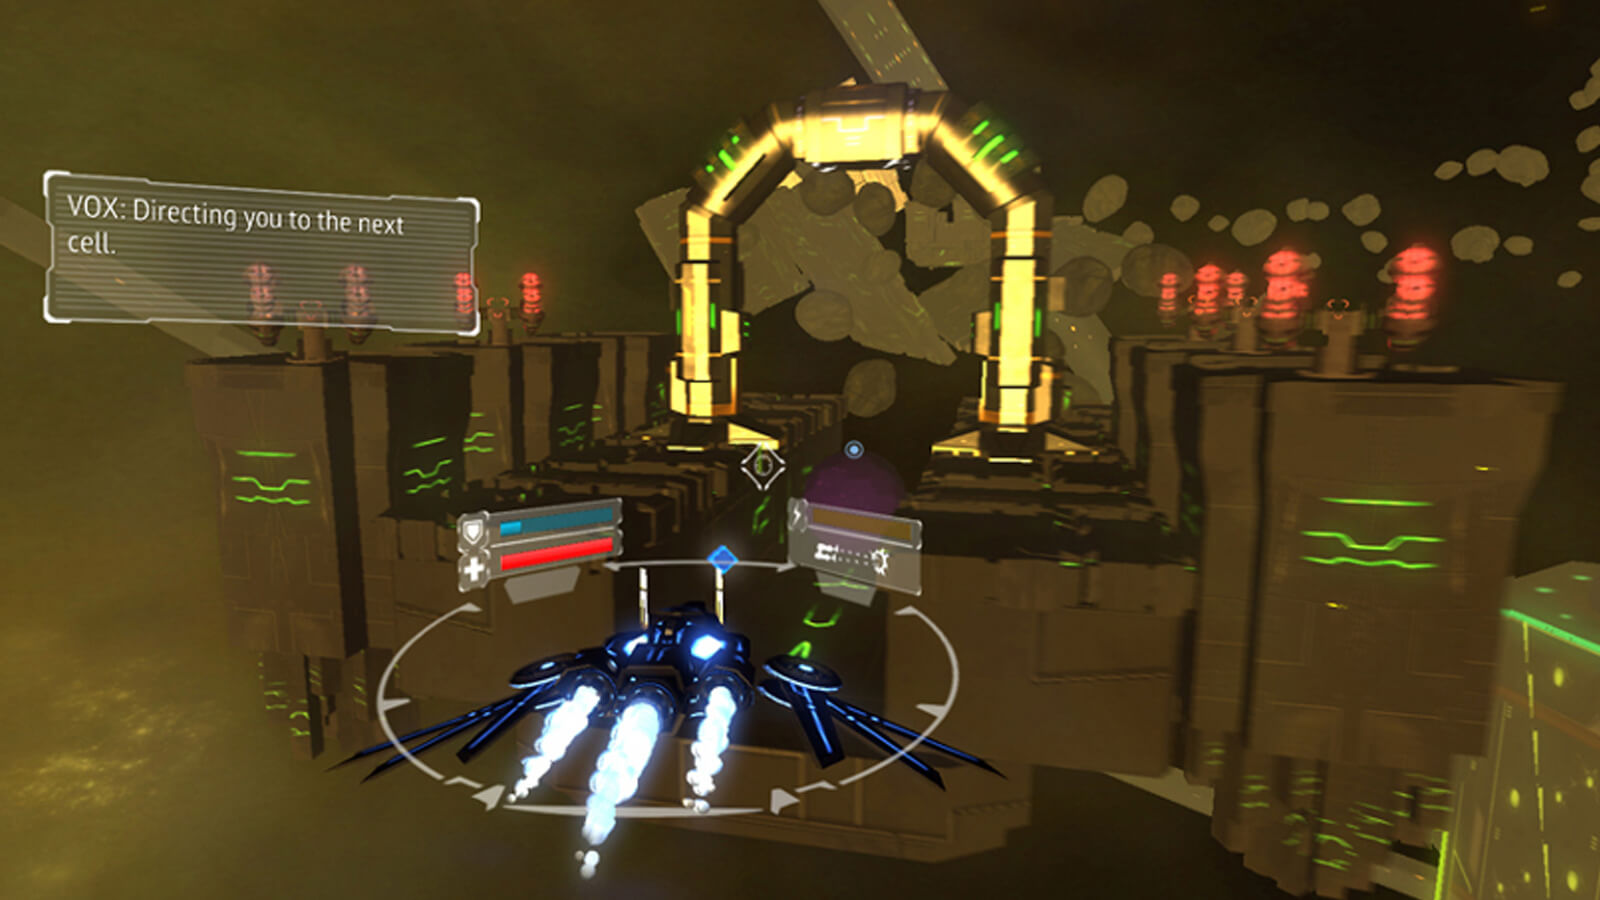 The player's ship rushes toward a glowing yellow arch in a hazy area of space